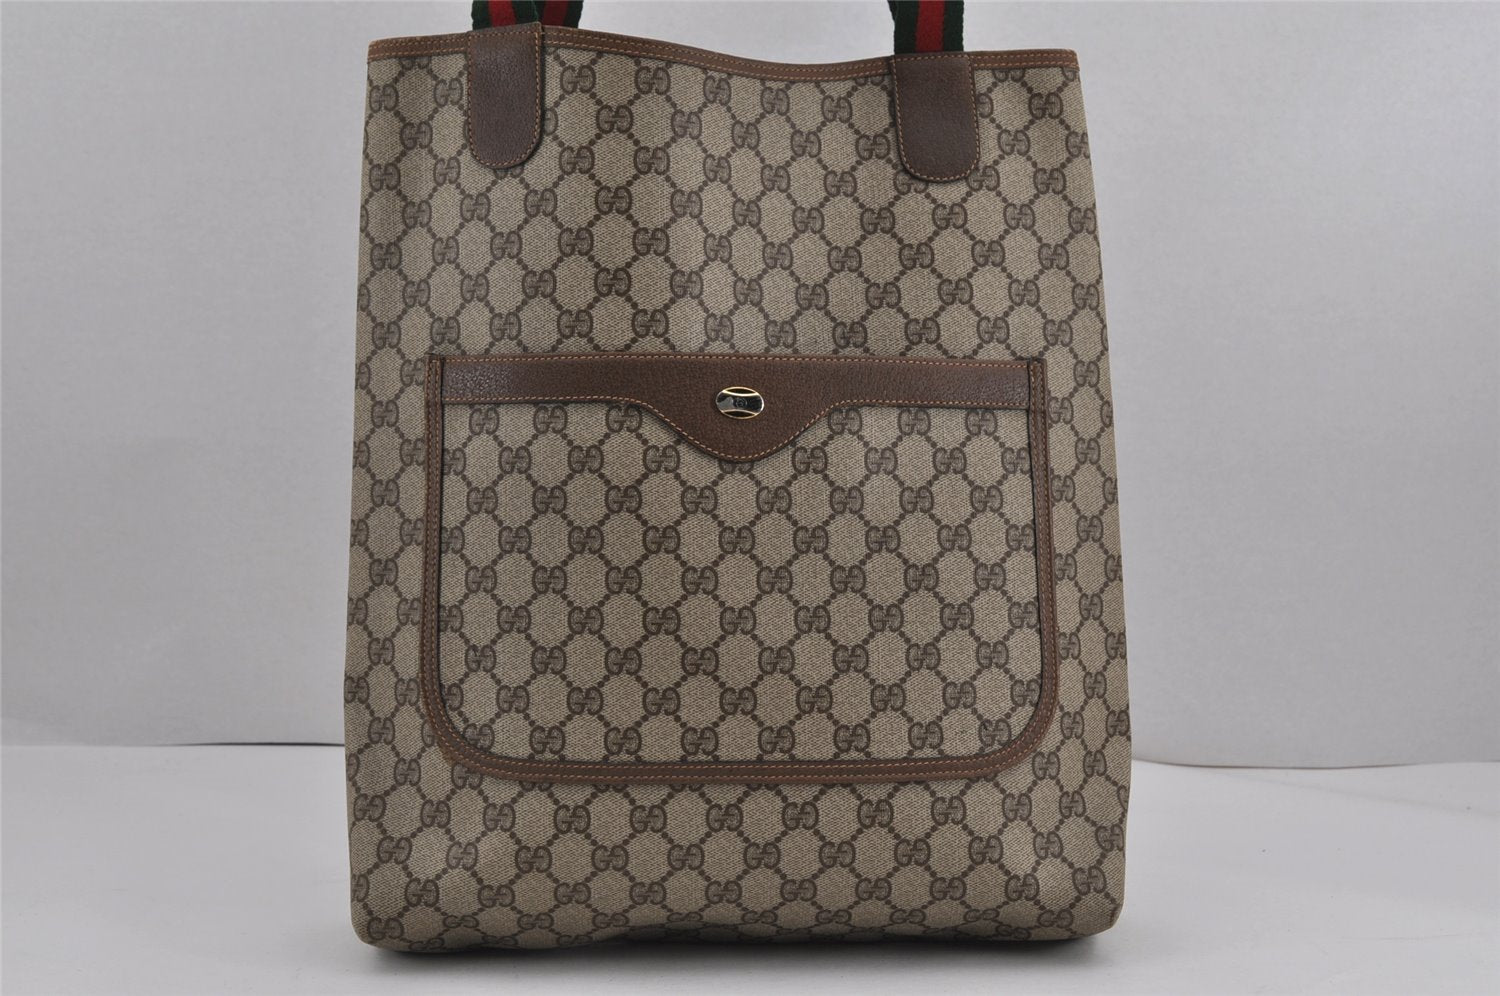 Authentic GUCCI Web Sherry Line Shoulder Tote Bag GG PVC Leather Brown 9559J